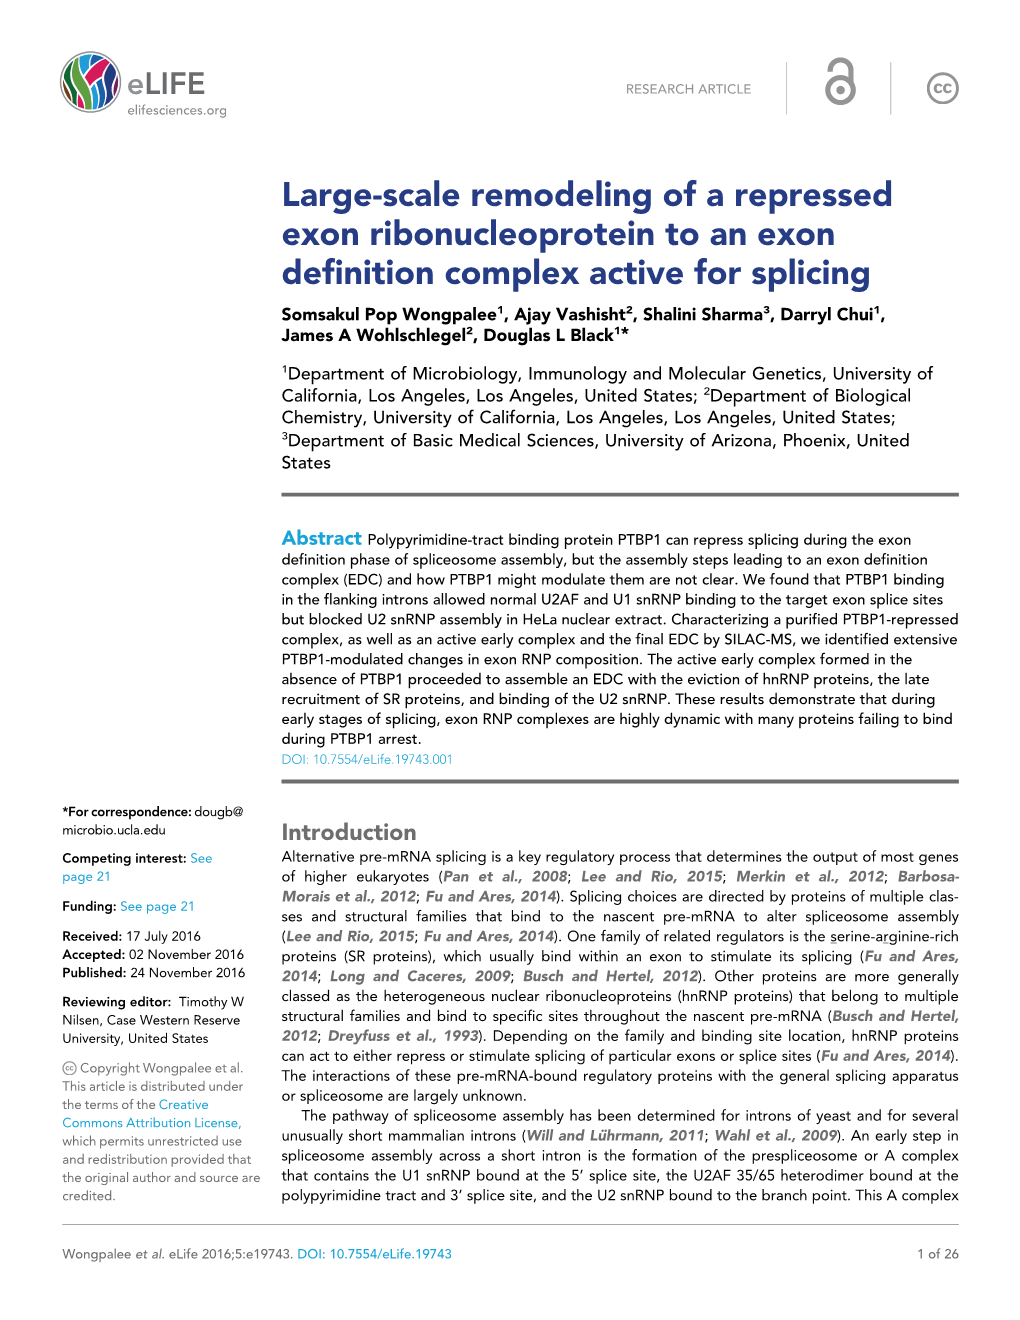 Large-Scale Remodeling of a Repressed Exon Ribonucleoprotein